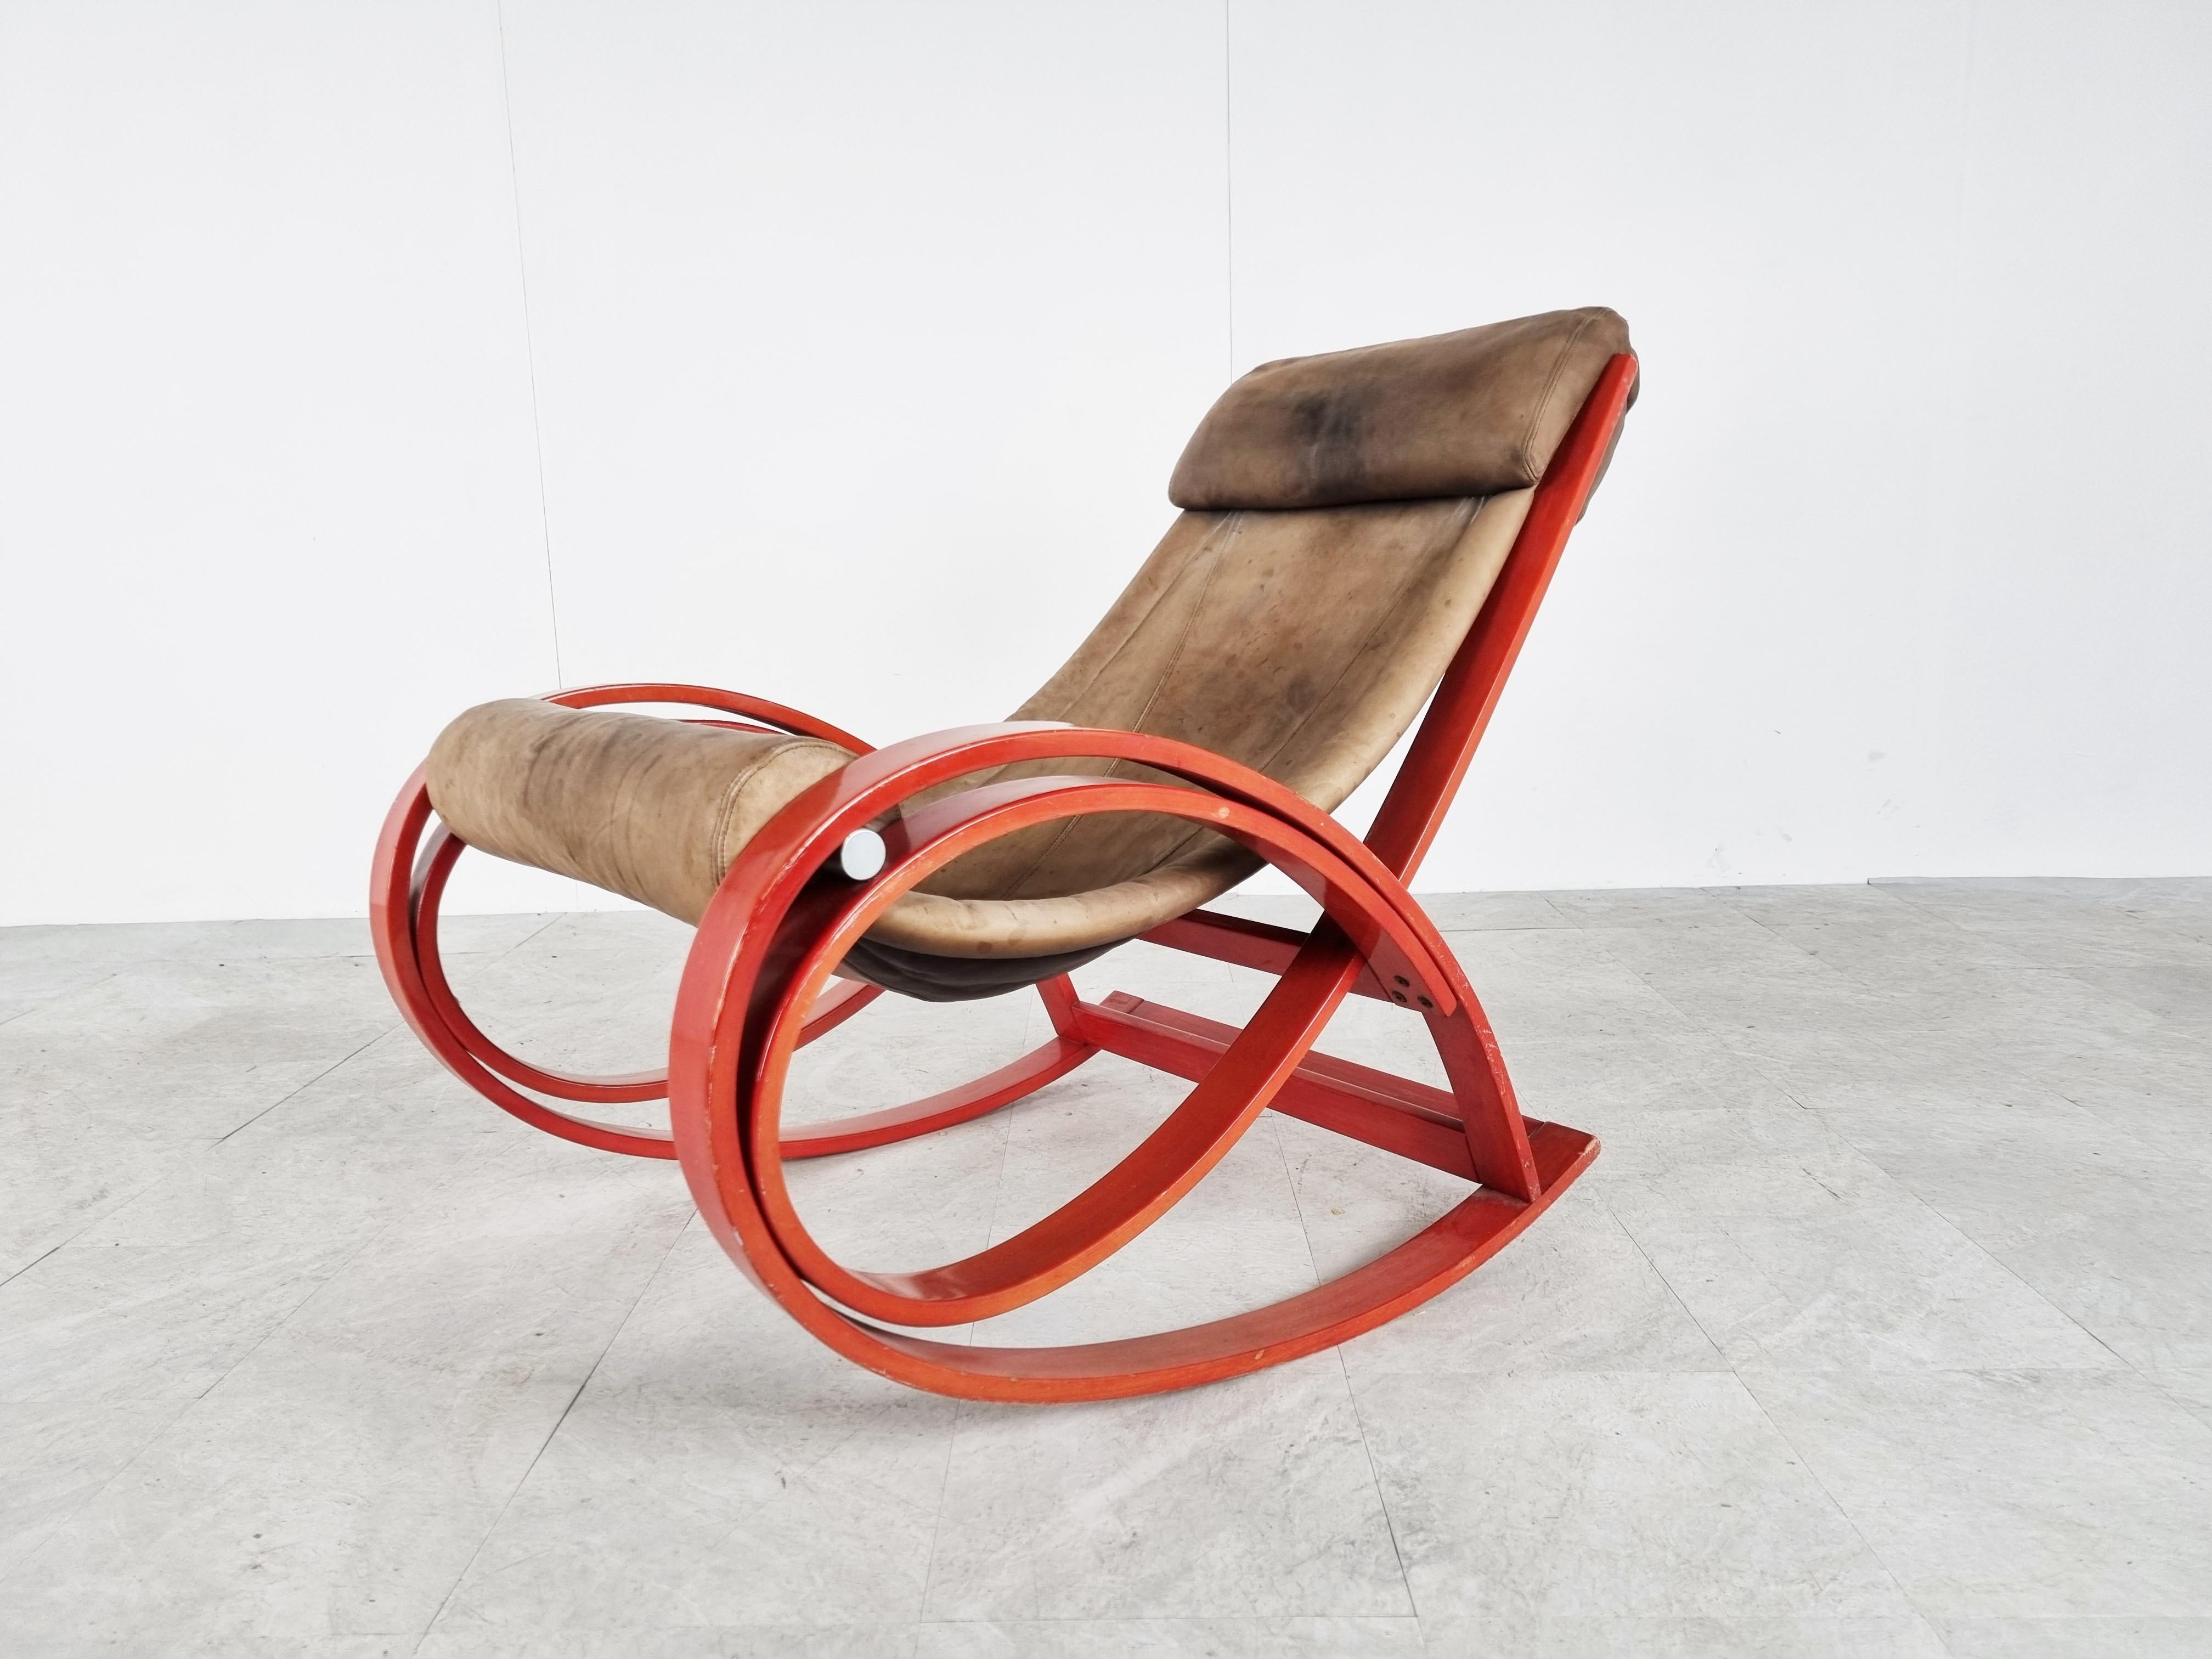 Sgarsul Rocking Chair by Gae Aulenti for Poltronova, 1960s For Sale 2